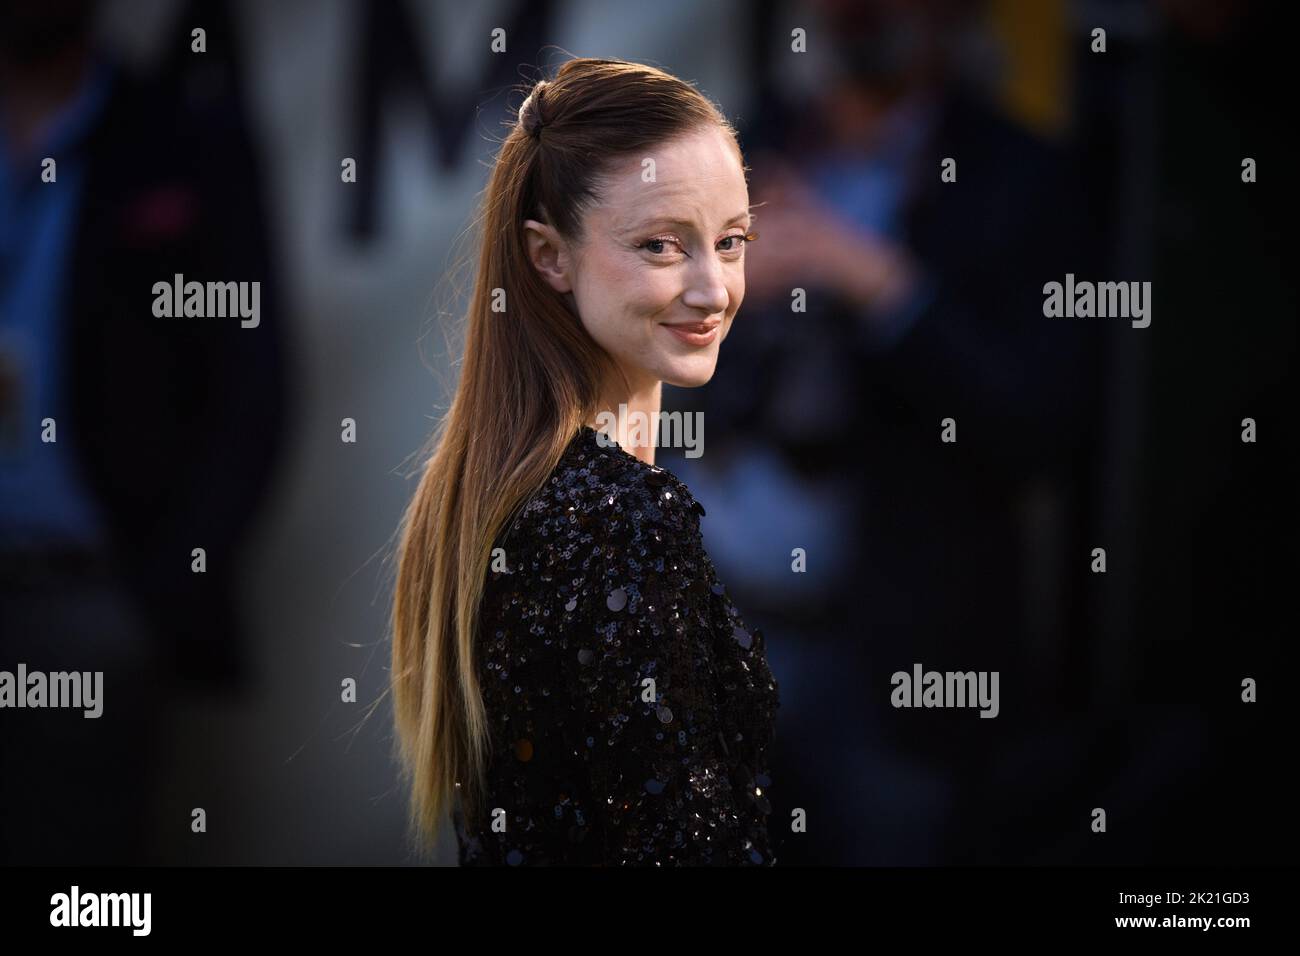 London, UK. 21 September 2022. Andrea Riseborough attending the European premiere of Amsterdam at the Odeon Luxe Leicester Square Cinema, London Picture date: Wednesday September 21, 2022. Photo credit should read: Matt Crossick/Empics/Alamy Live News Stock Photo